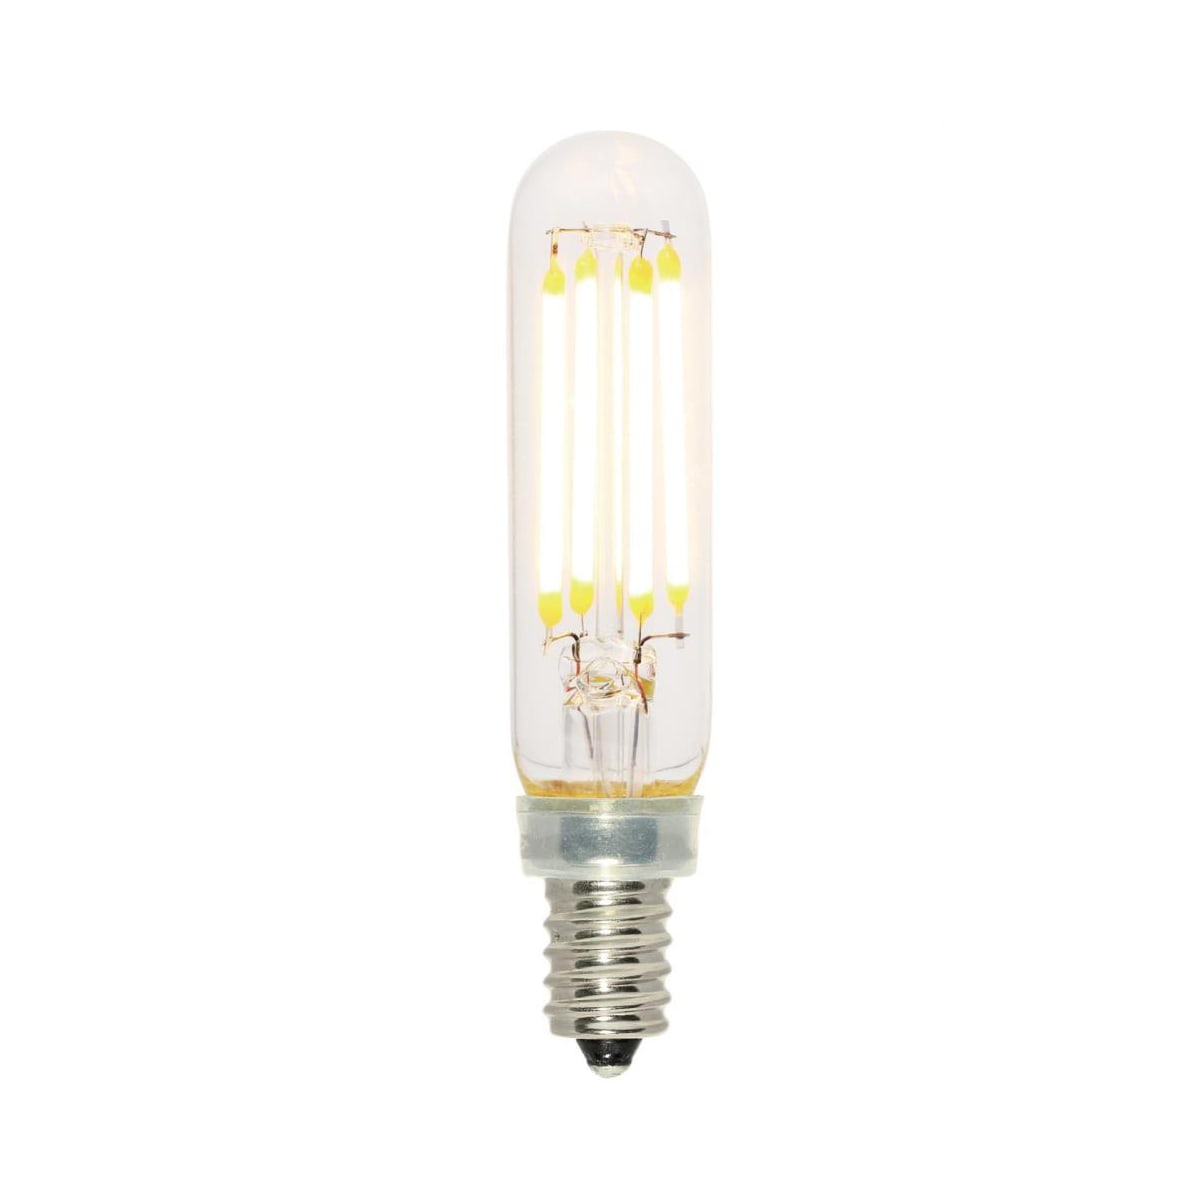 Monograph genius toxicity Westinghouse 5168020 Clear Pack of (6) 4.5 Watt Dimmable T6 Candelabra  (E12) LED Bulbs - 450 Lumens, 2700K, and 80CRI - LightingDirect.com